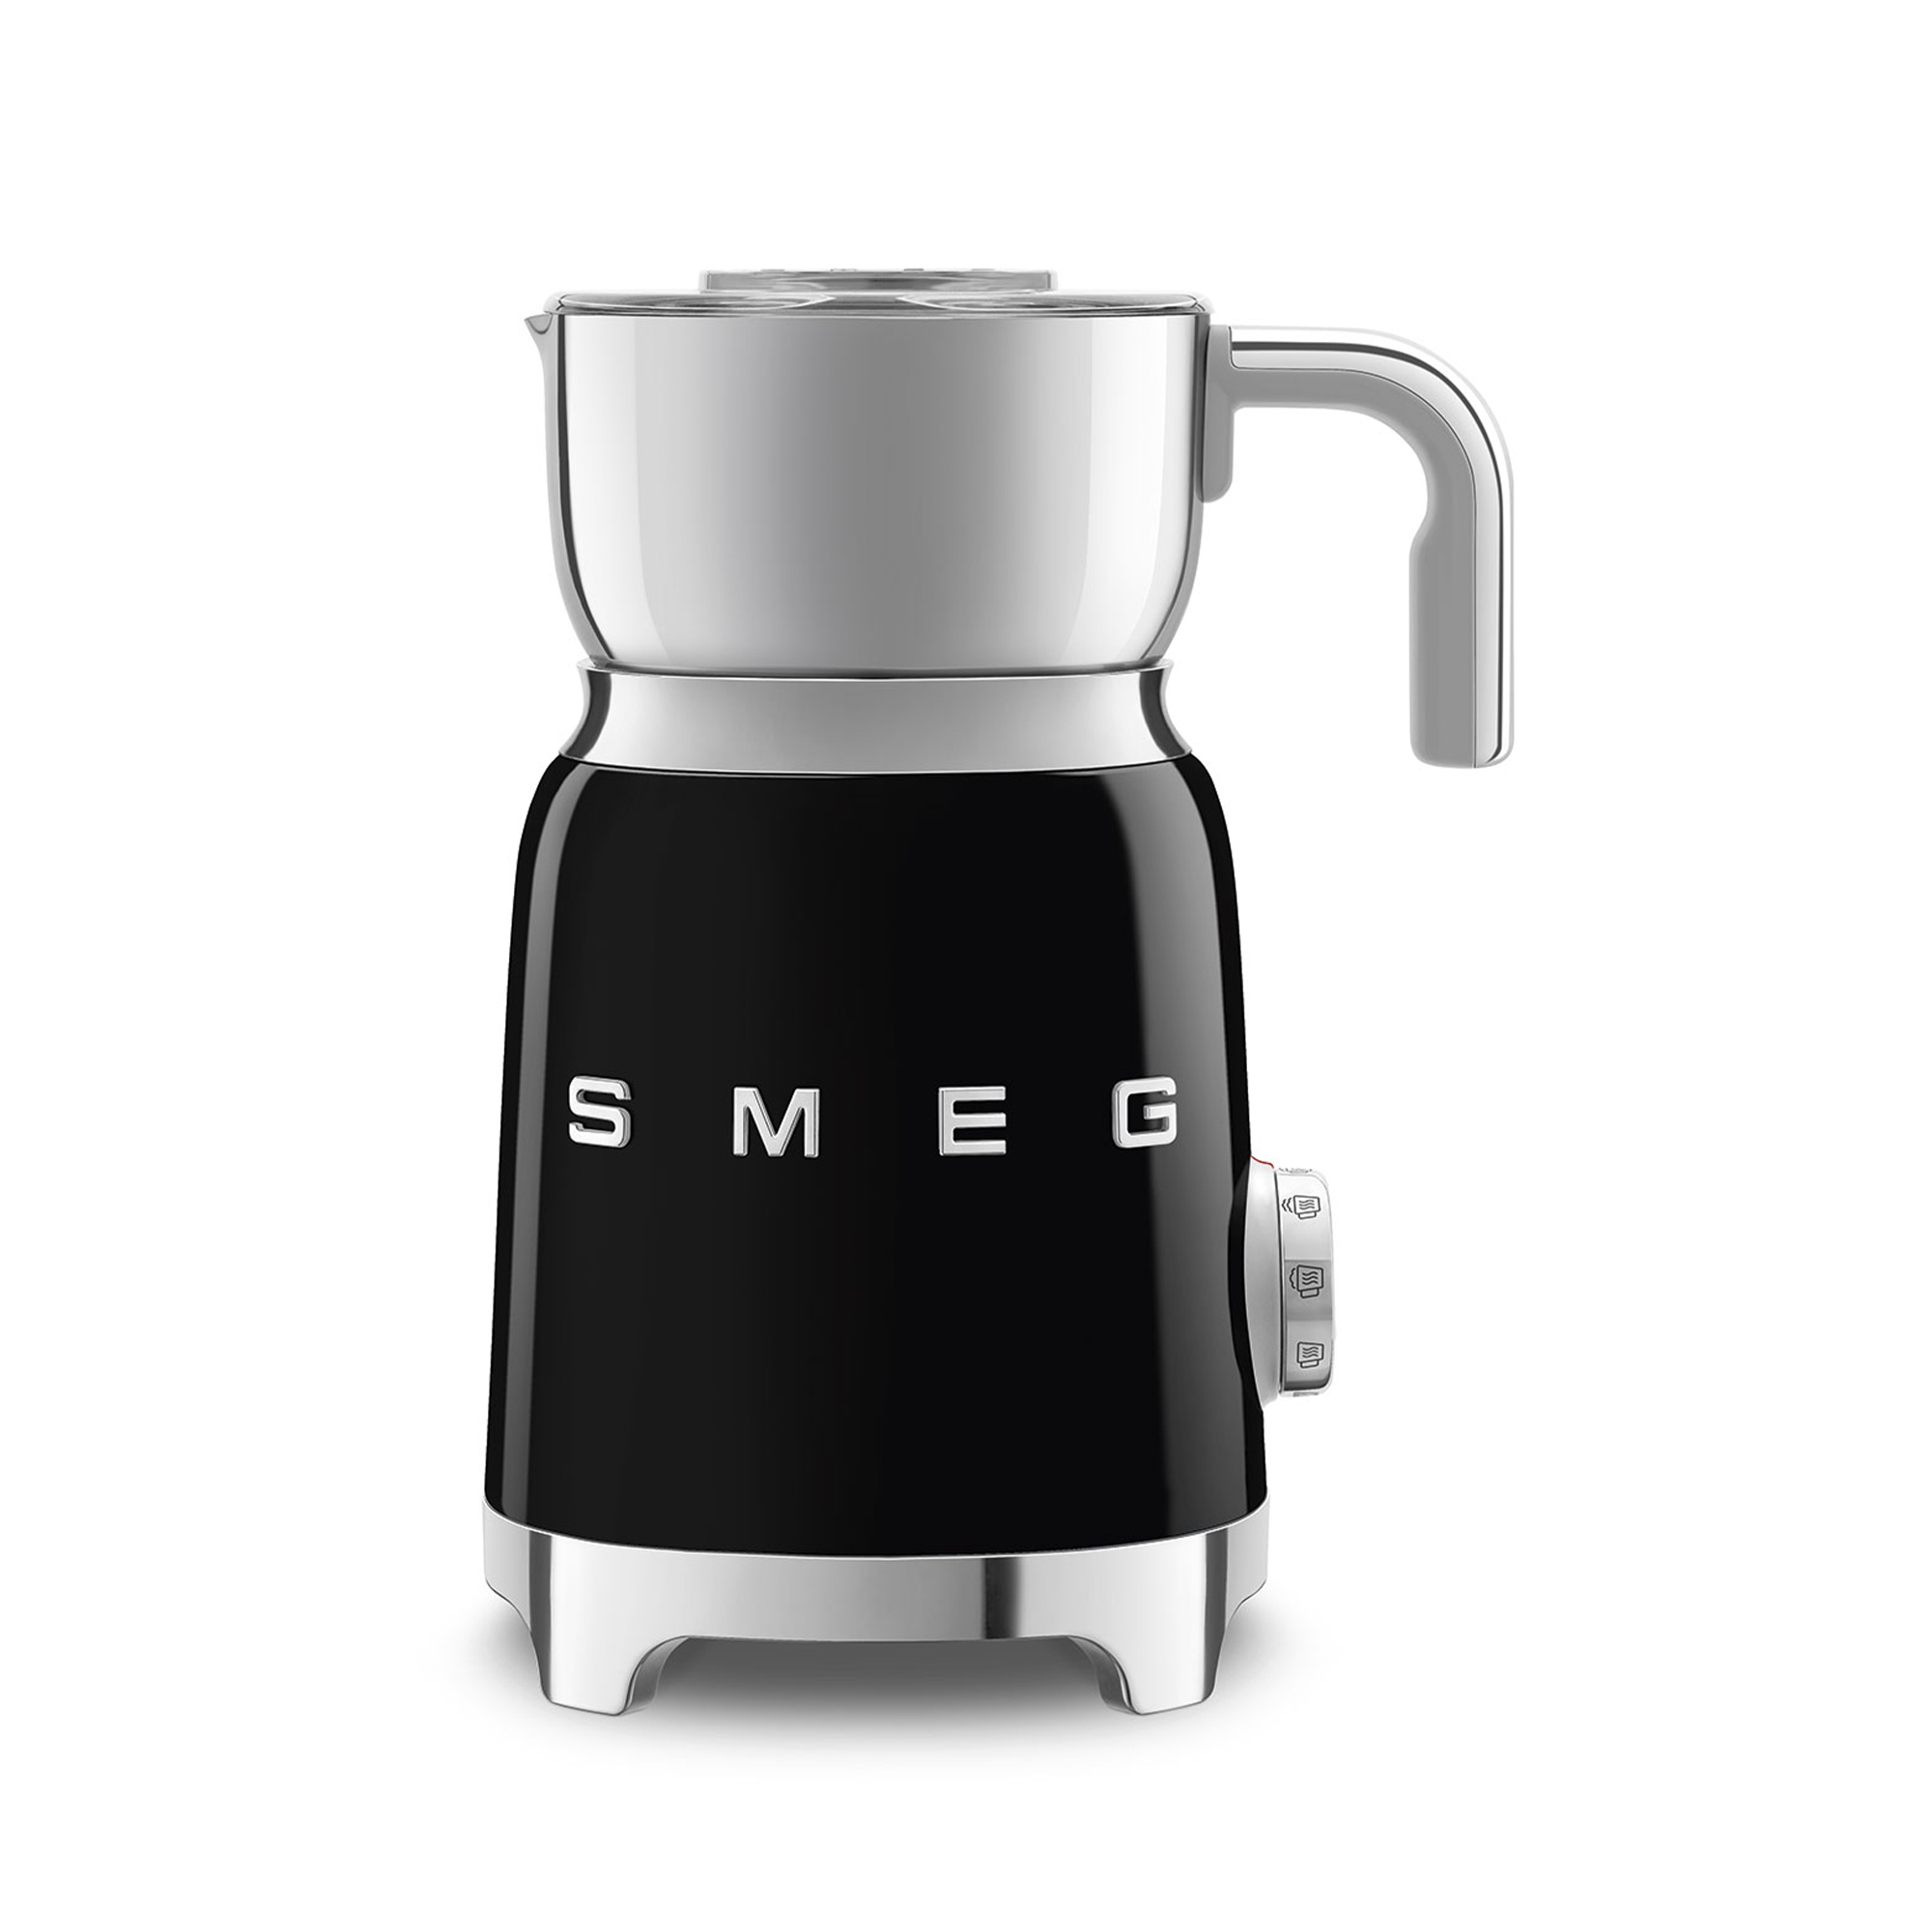 Smeg - milk frother MFF11 - design line style The 50 ° years